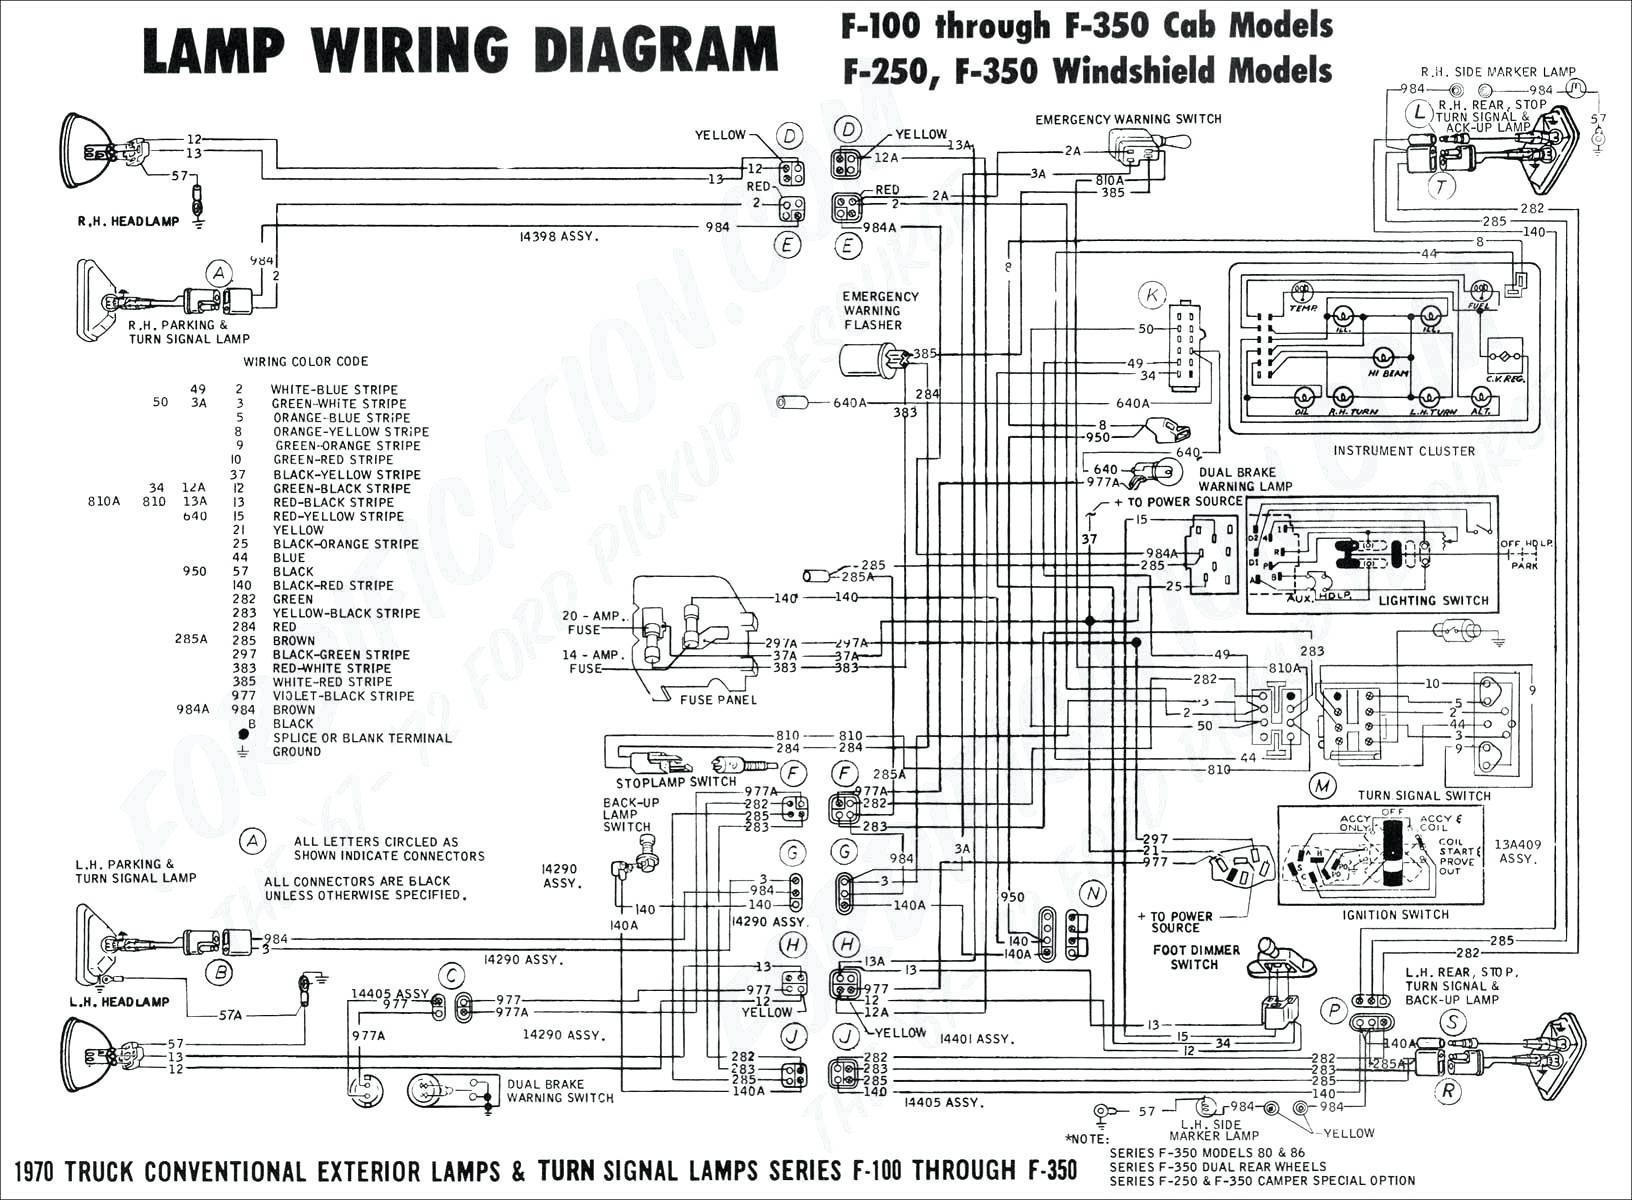 5915 21 Hp Briggs And Stratton Engine Diagram My Wiring Diagram Wiring Library